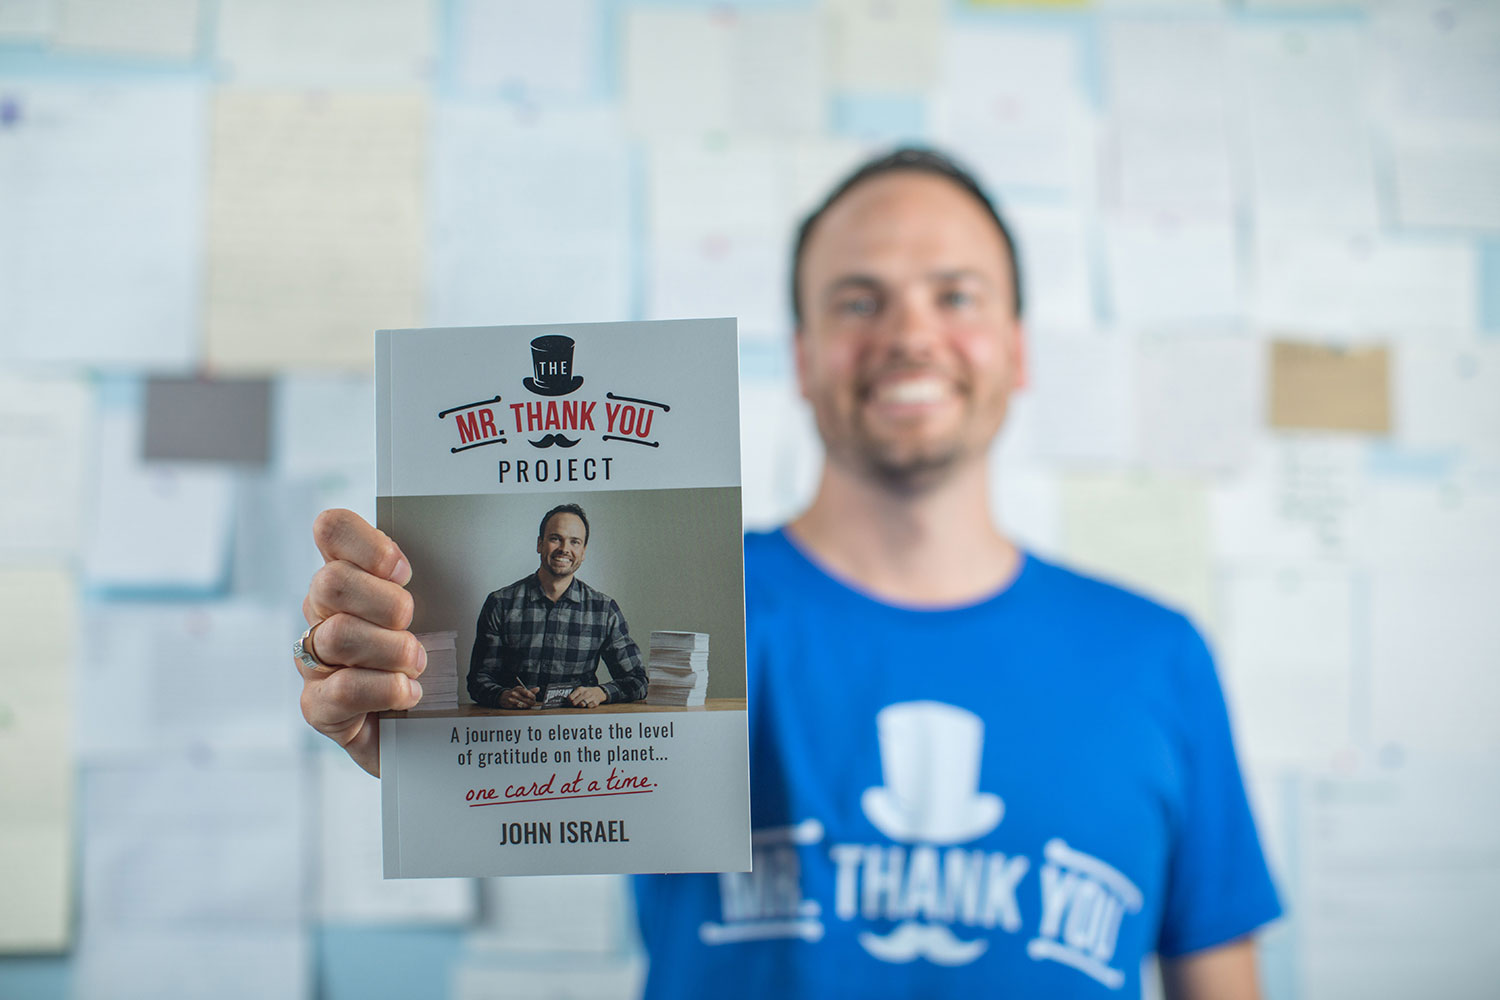 John Israel's new book "The Mr. Thank You Project: A Journey to Elevate the Level of Gratitude on the Planet, One Card at a Time" // photos by Kathy Tran 